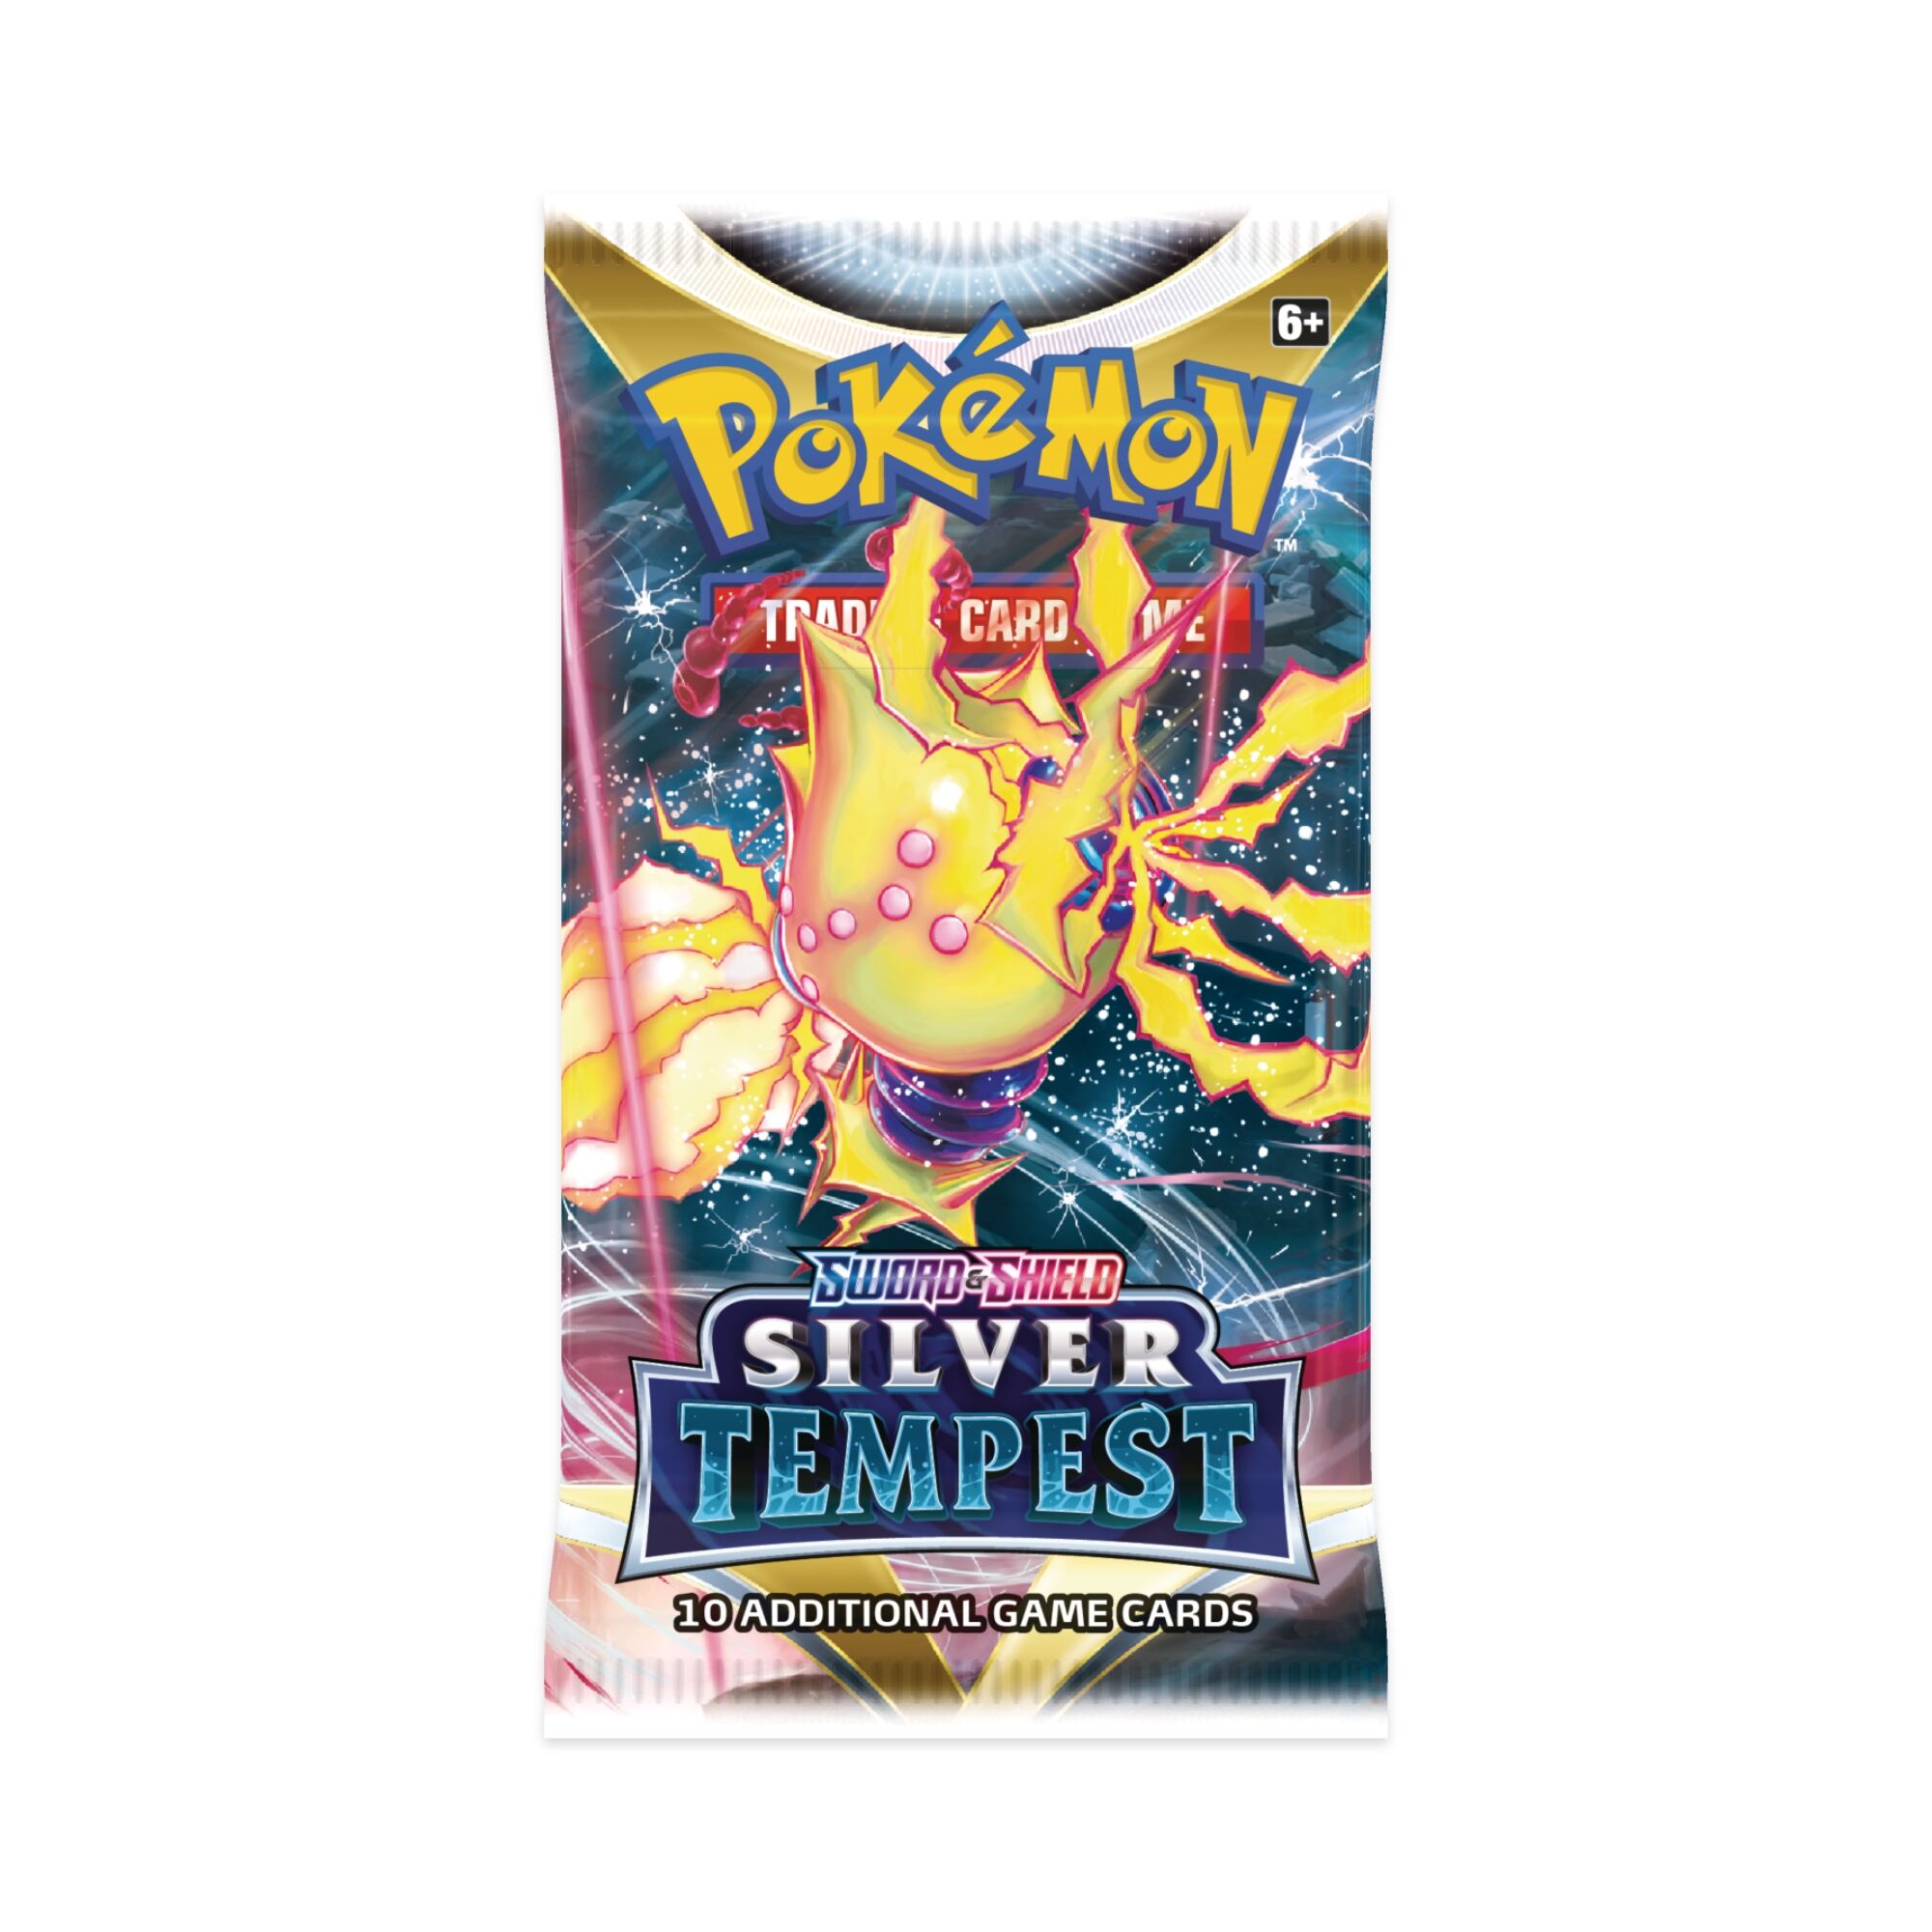 Silver Tempest - Booster (ENG)